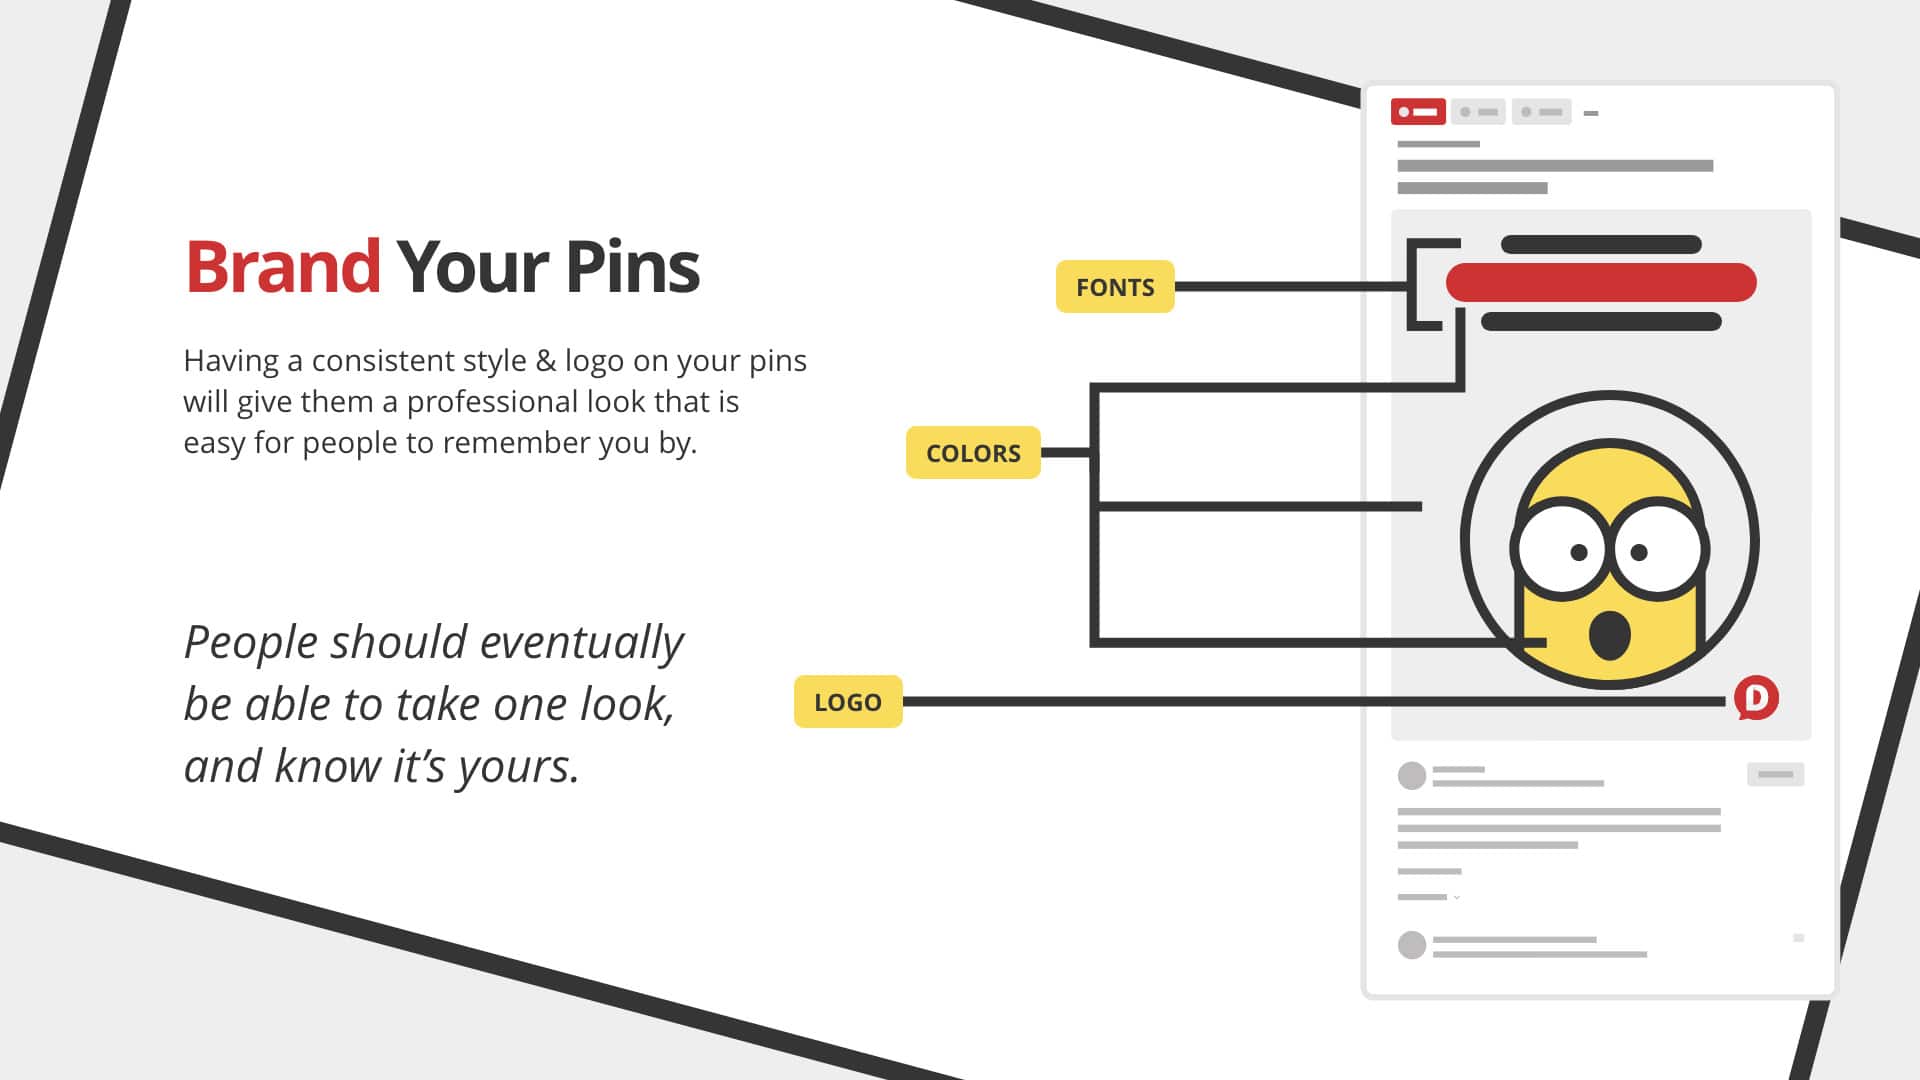 how to brand your pins